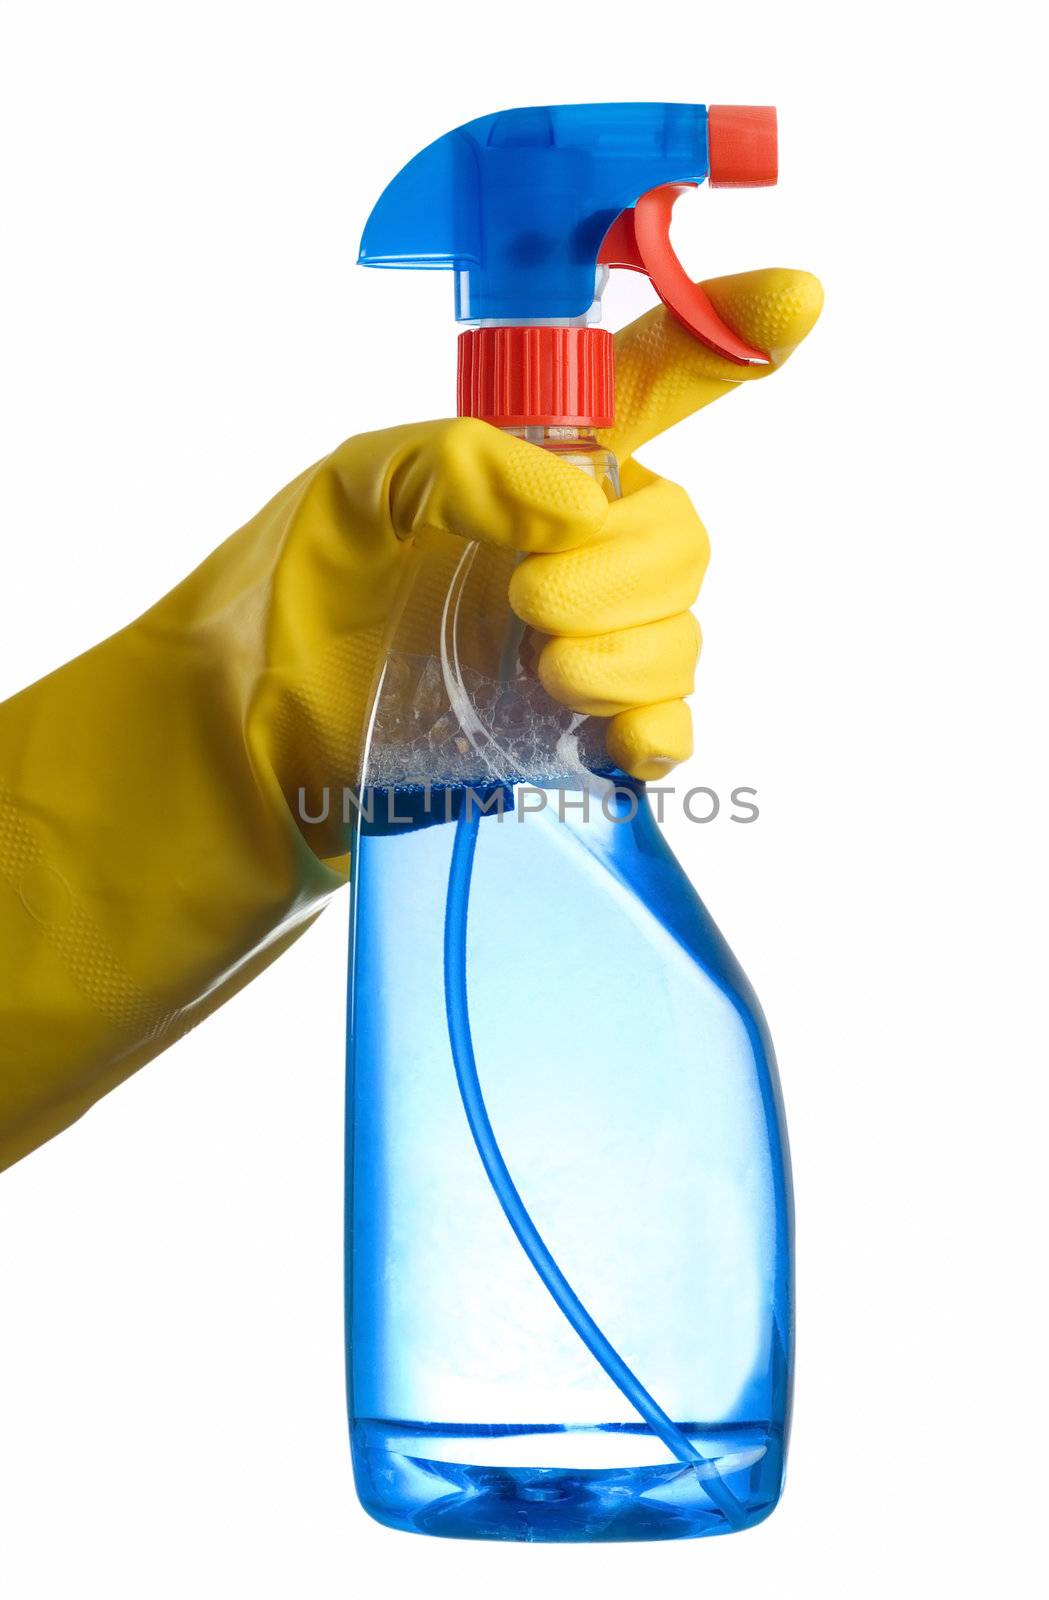 Cleaning bottle and hand by alistaircotton